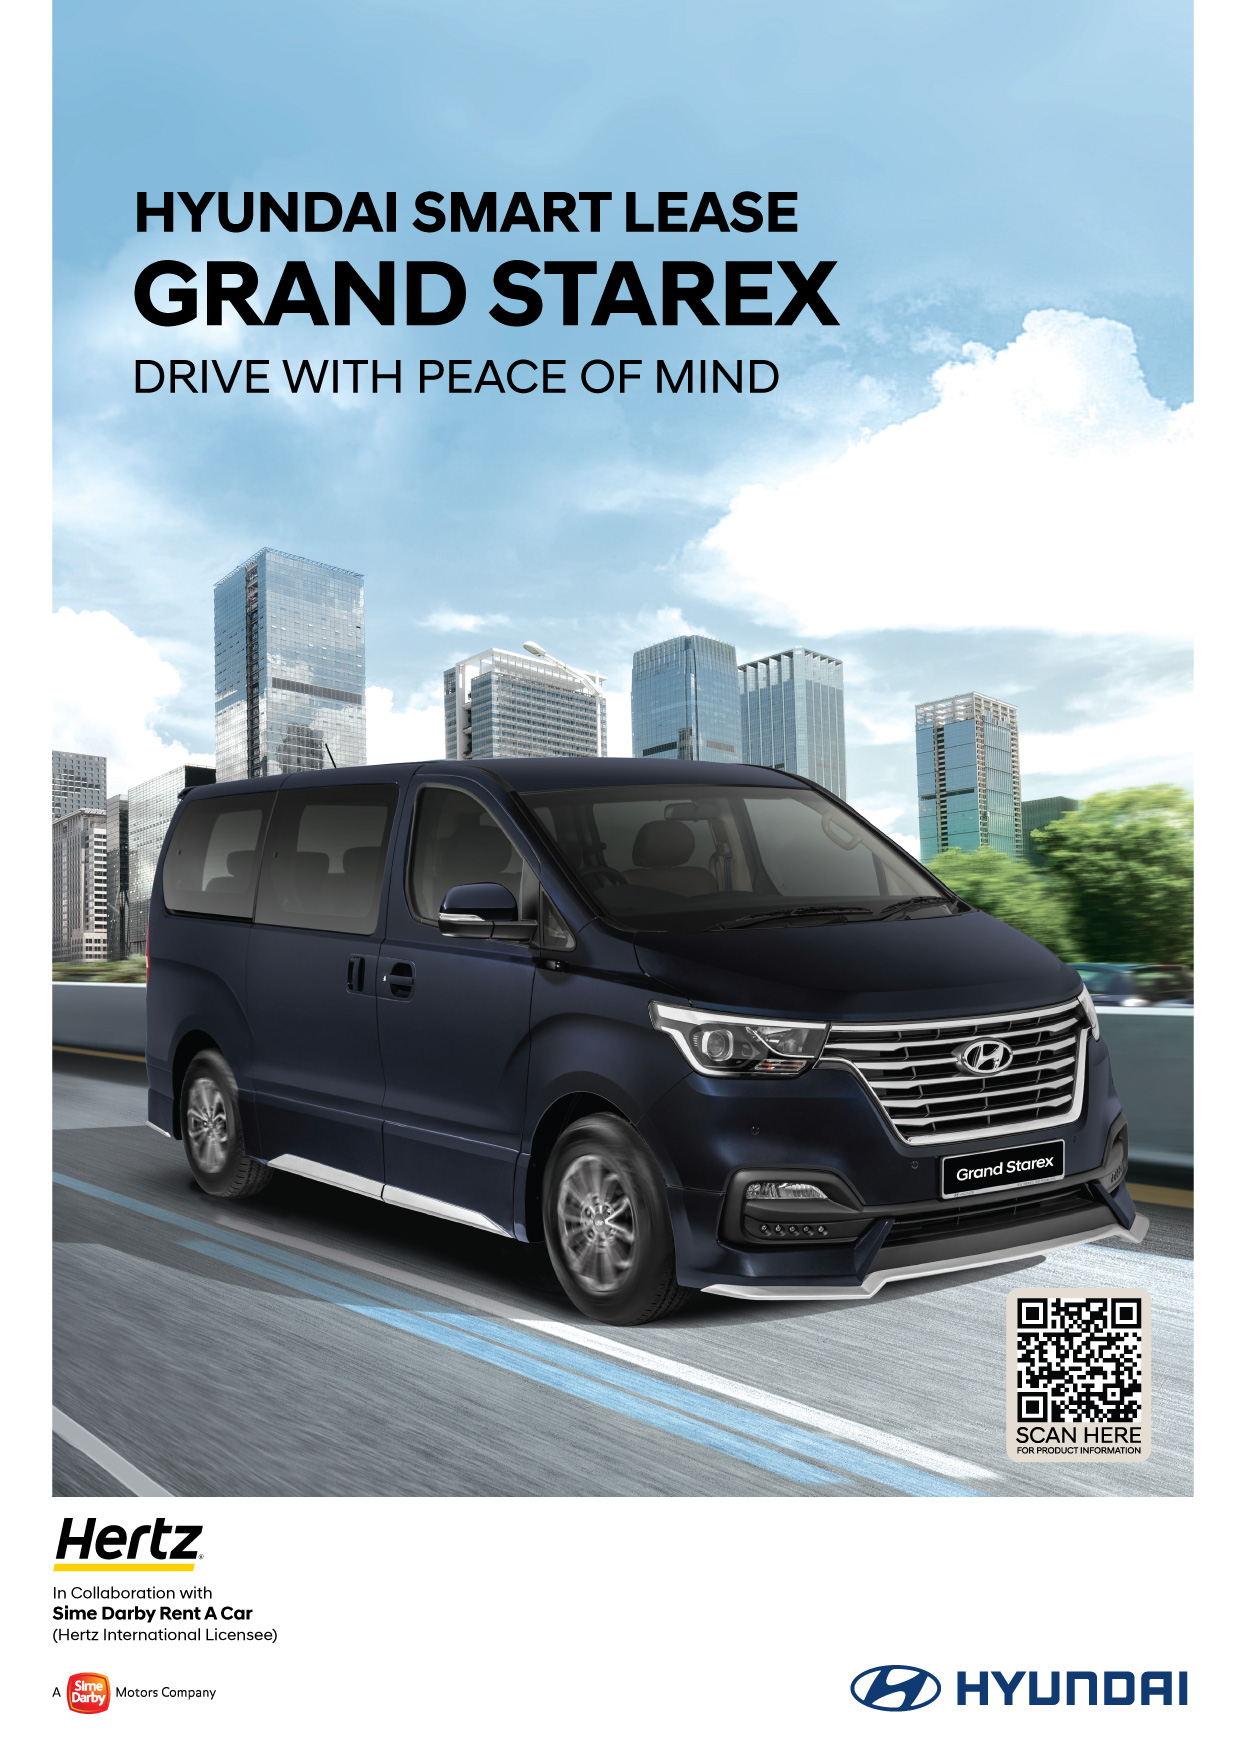 Hyundai Smart Lease - Grand Starex | Drive with peace of mind. In Collaboration with Sime Darby Rent a Car (Hertz International Licensee)